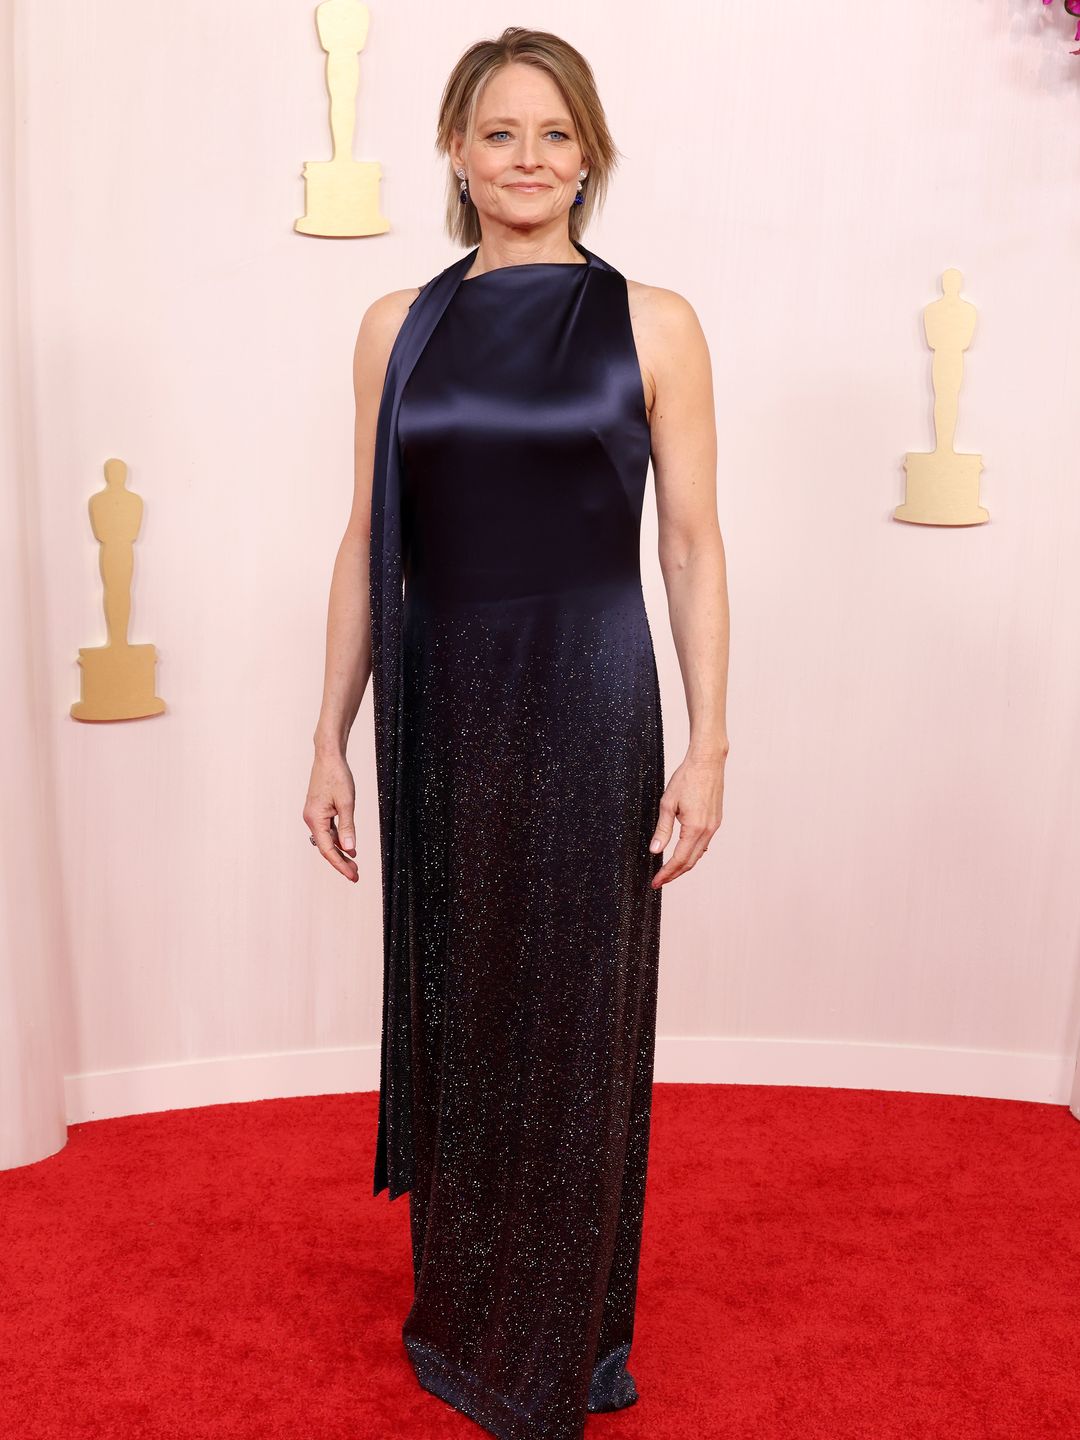 Jodie Foster attends the 96th Annual Academy Awards 